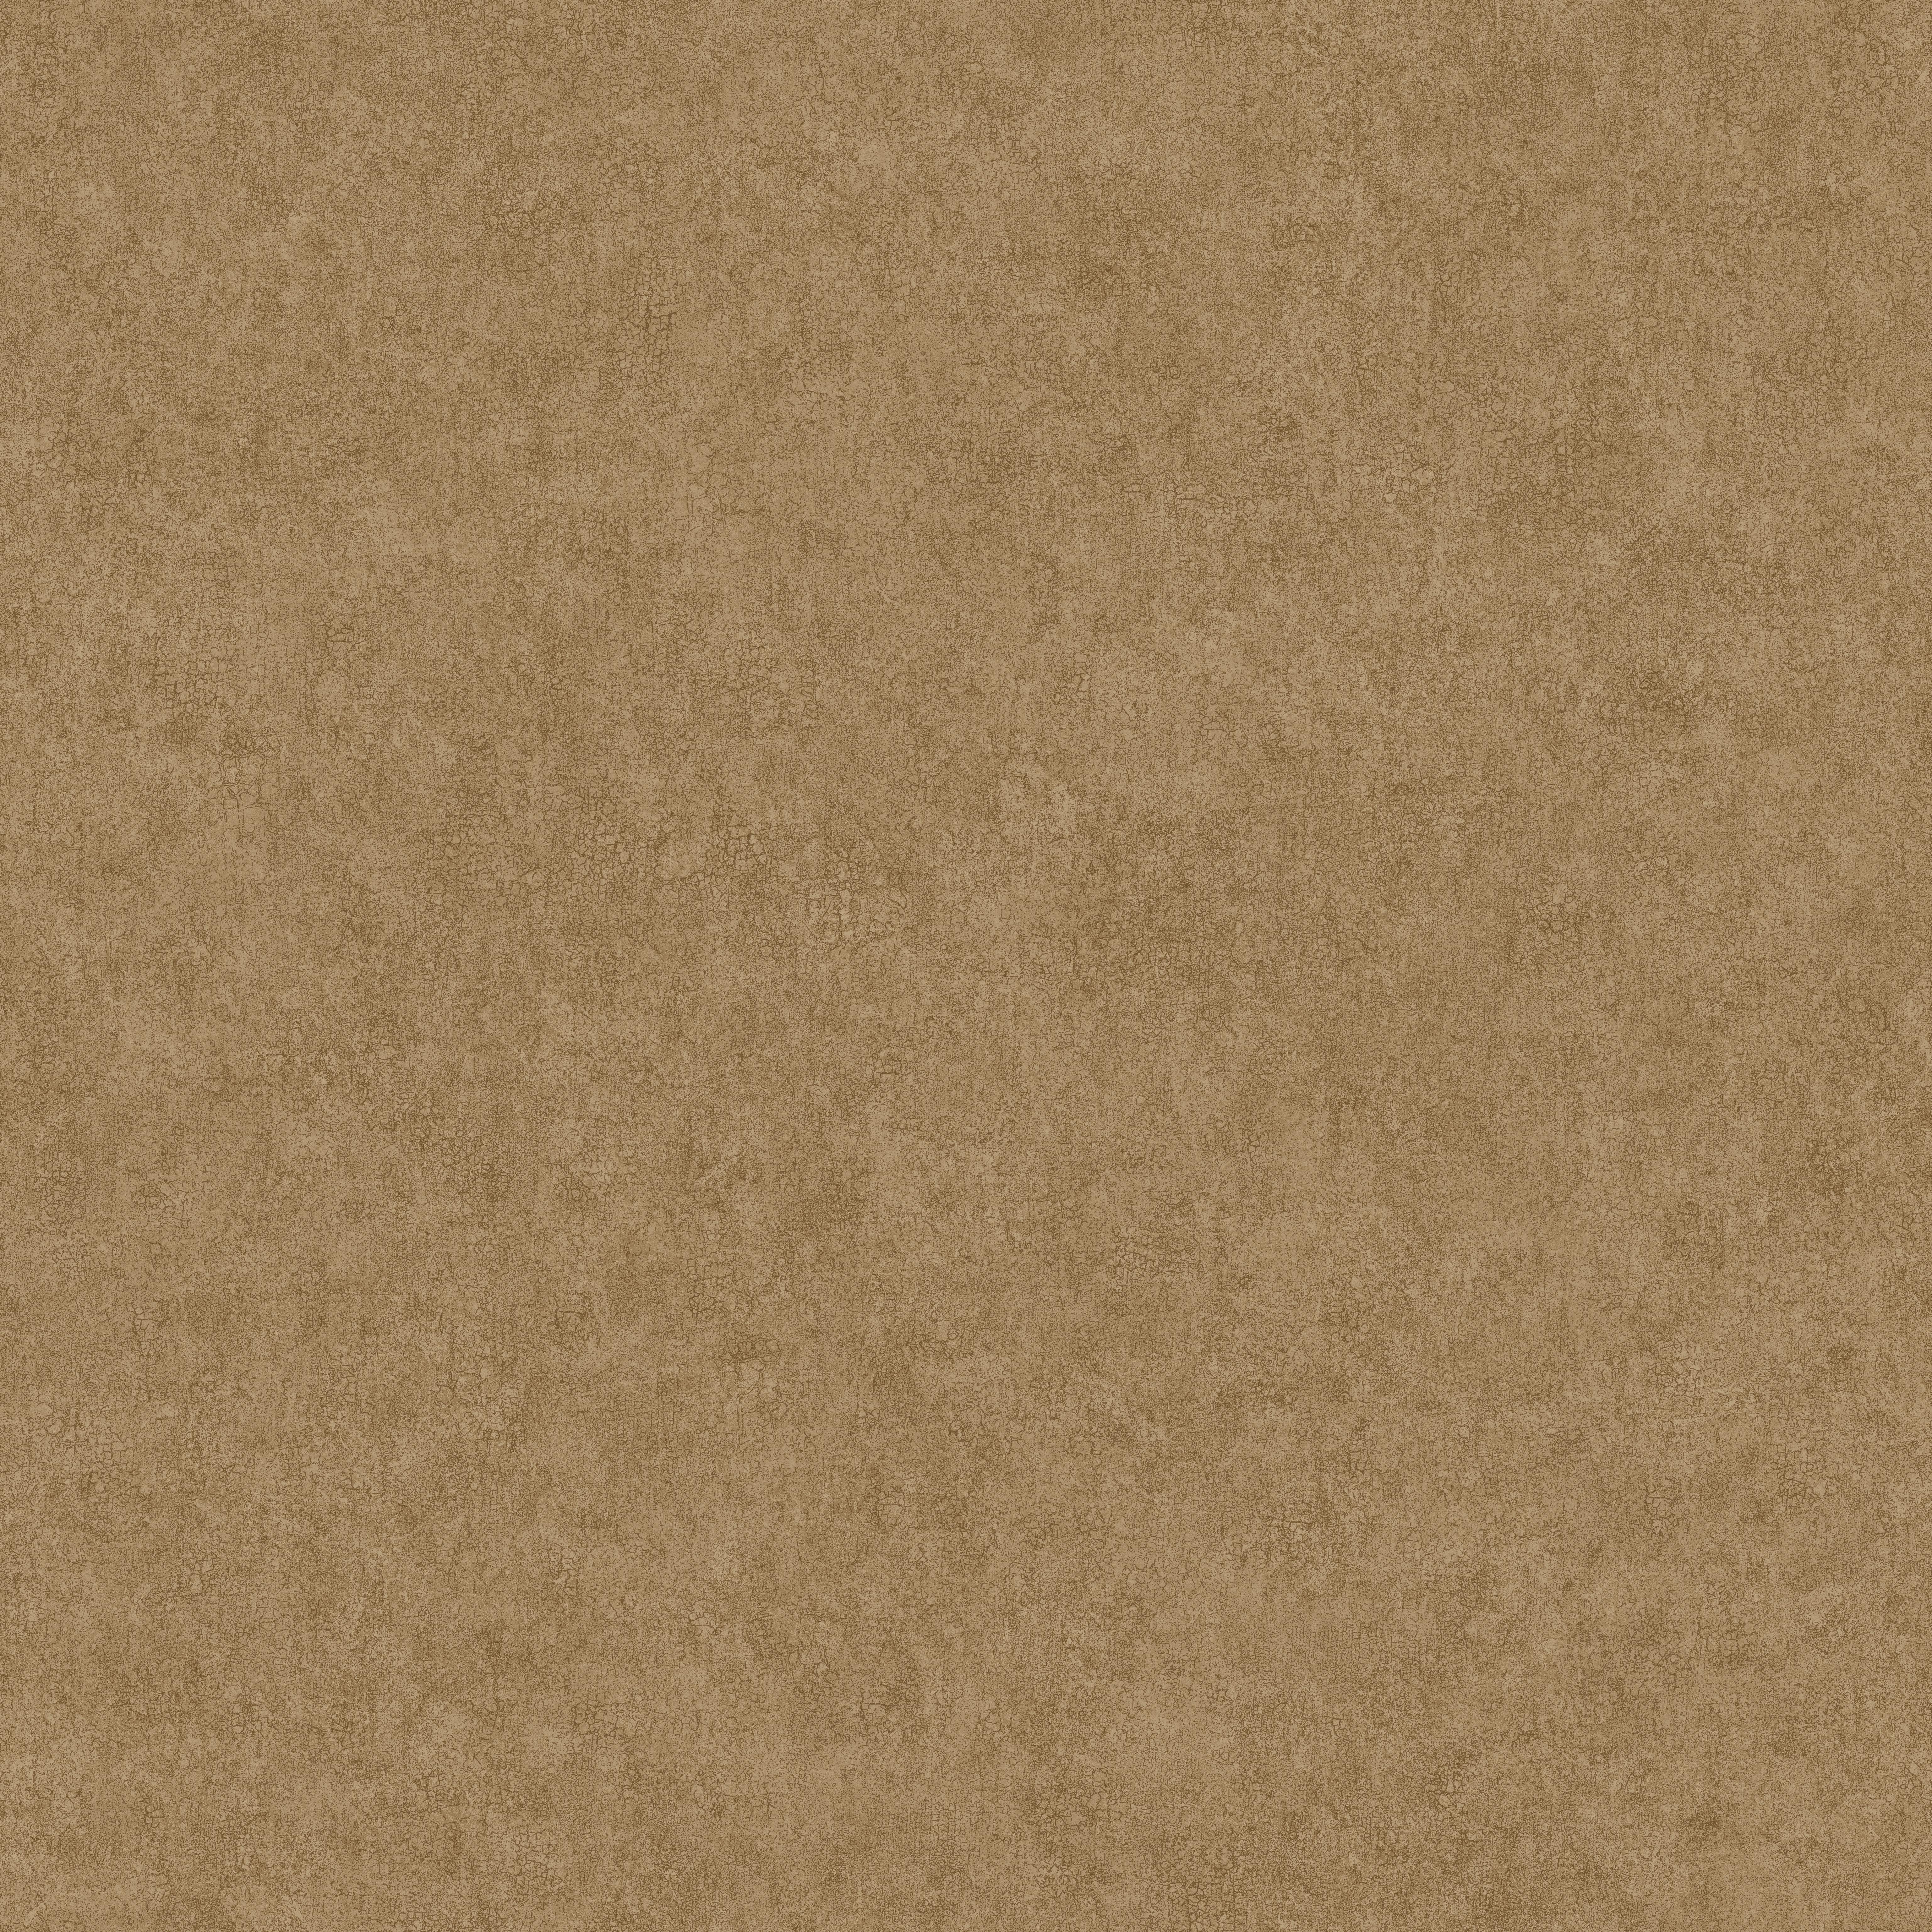 York Wallcovering Crackle Texture Brown Wallpaper Search Results